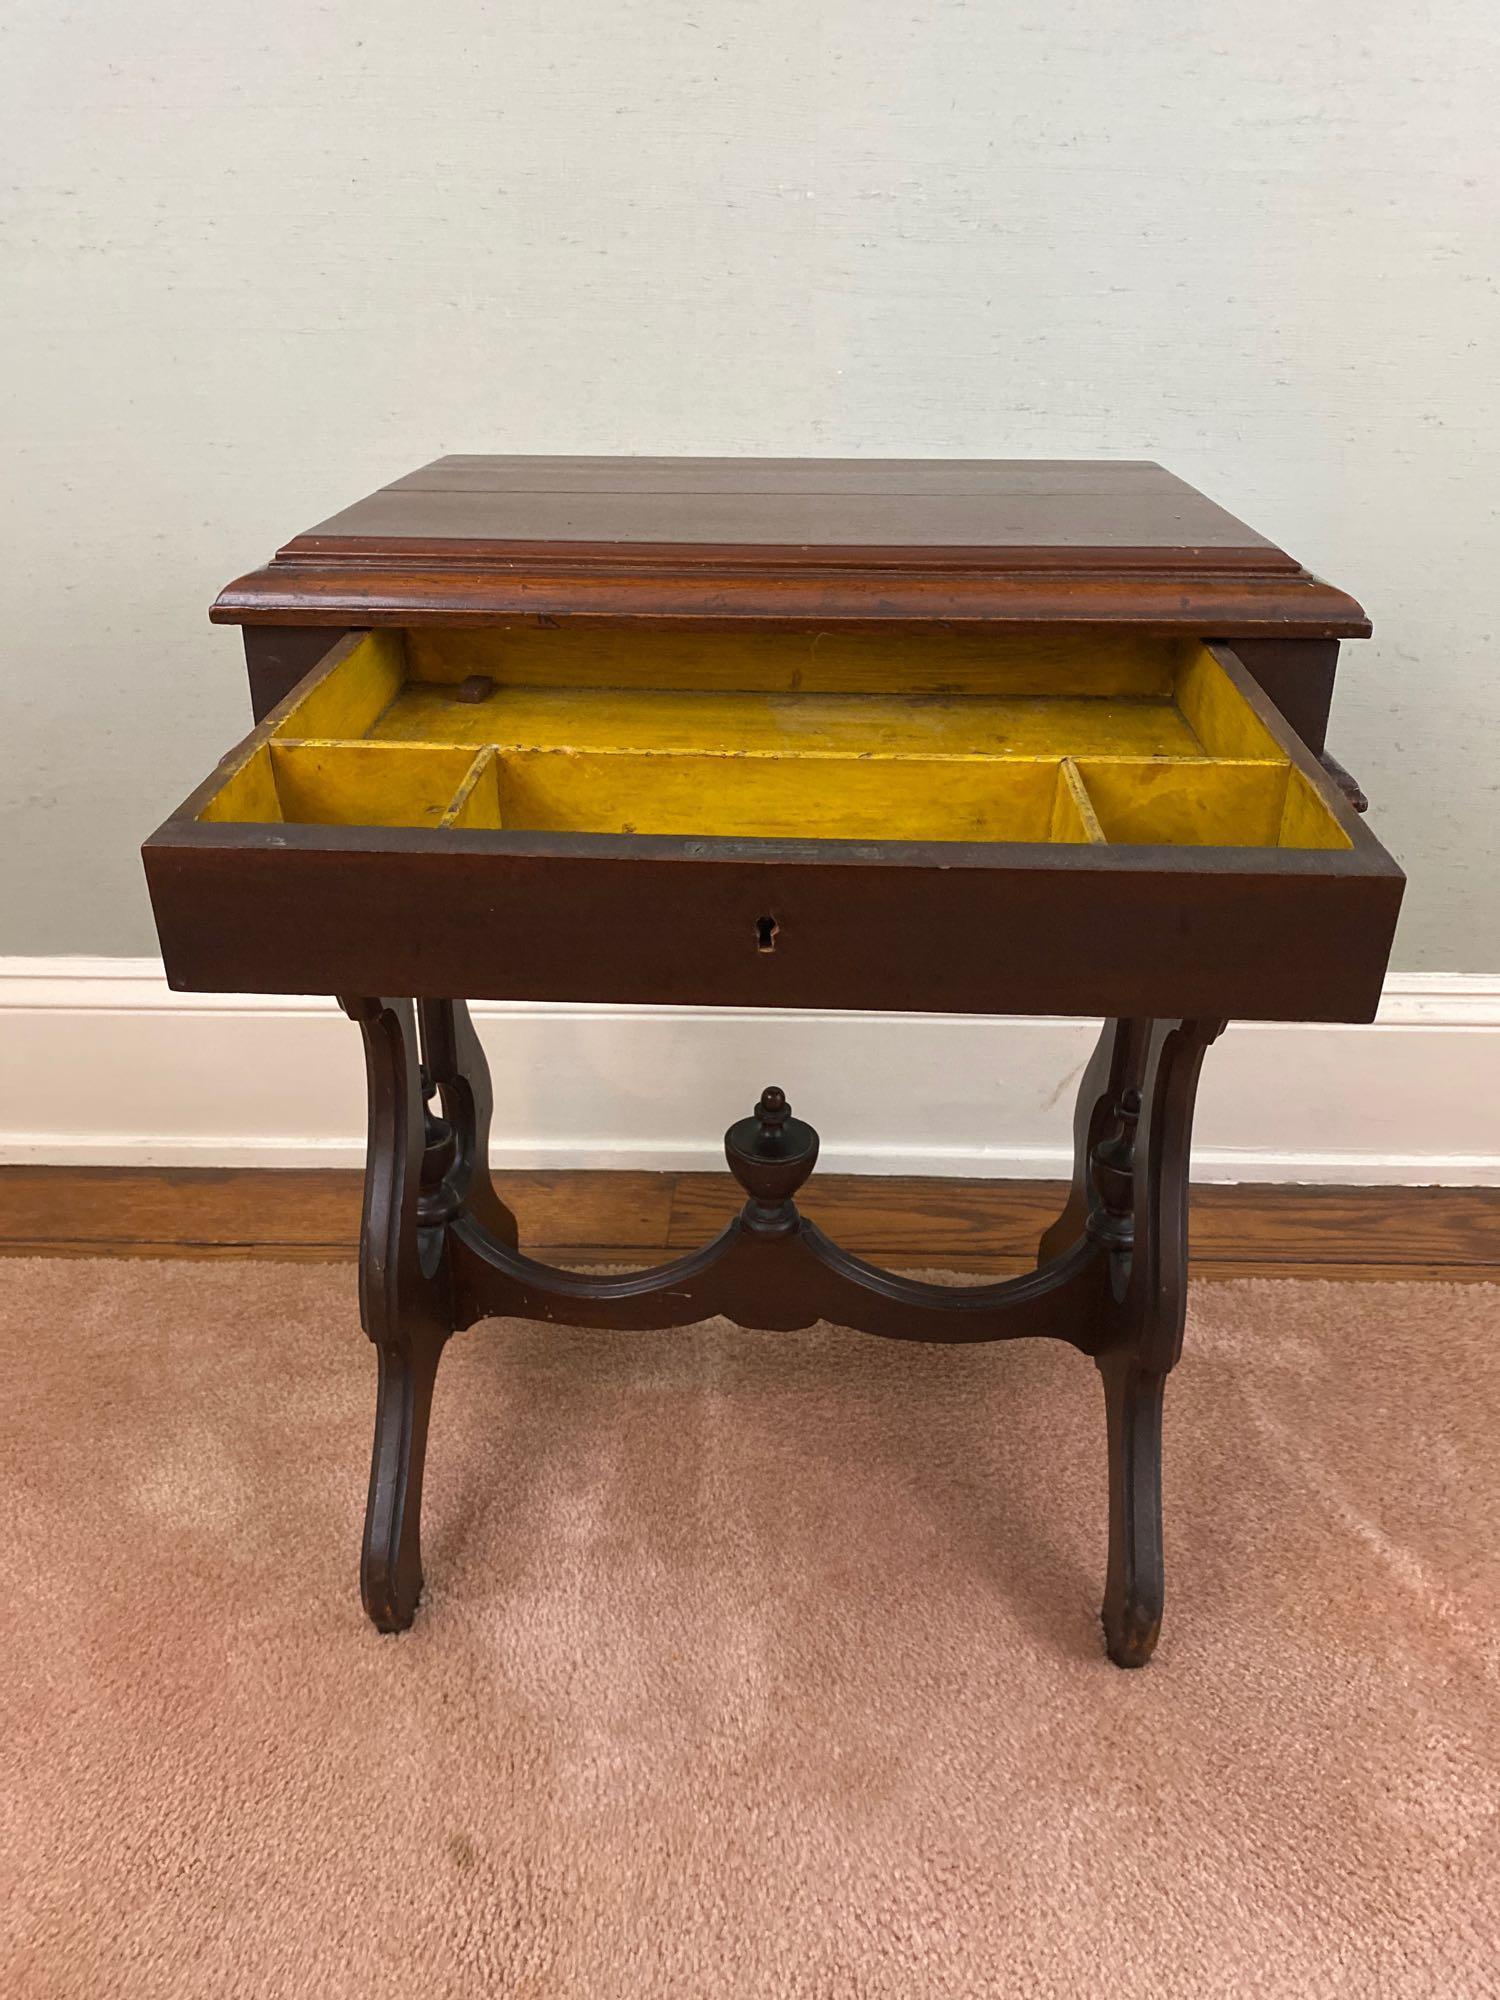 1870 Mahogany Sewing Table with Drawer